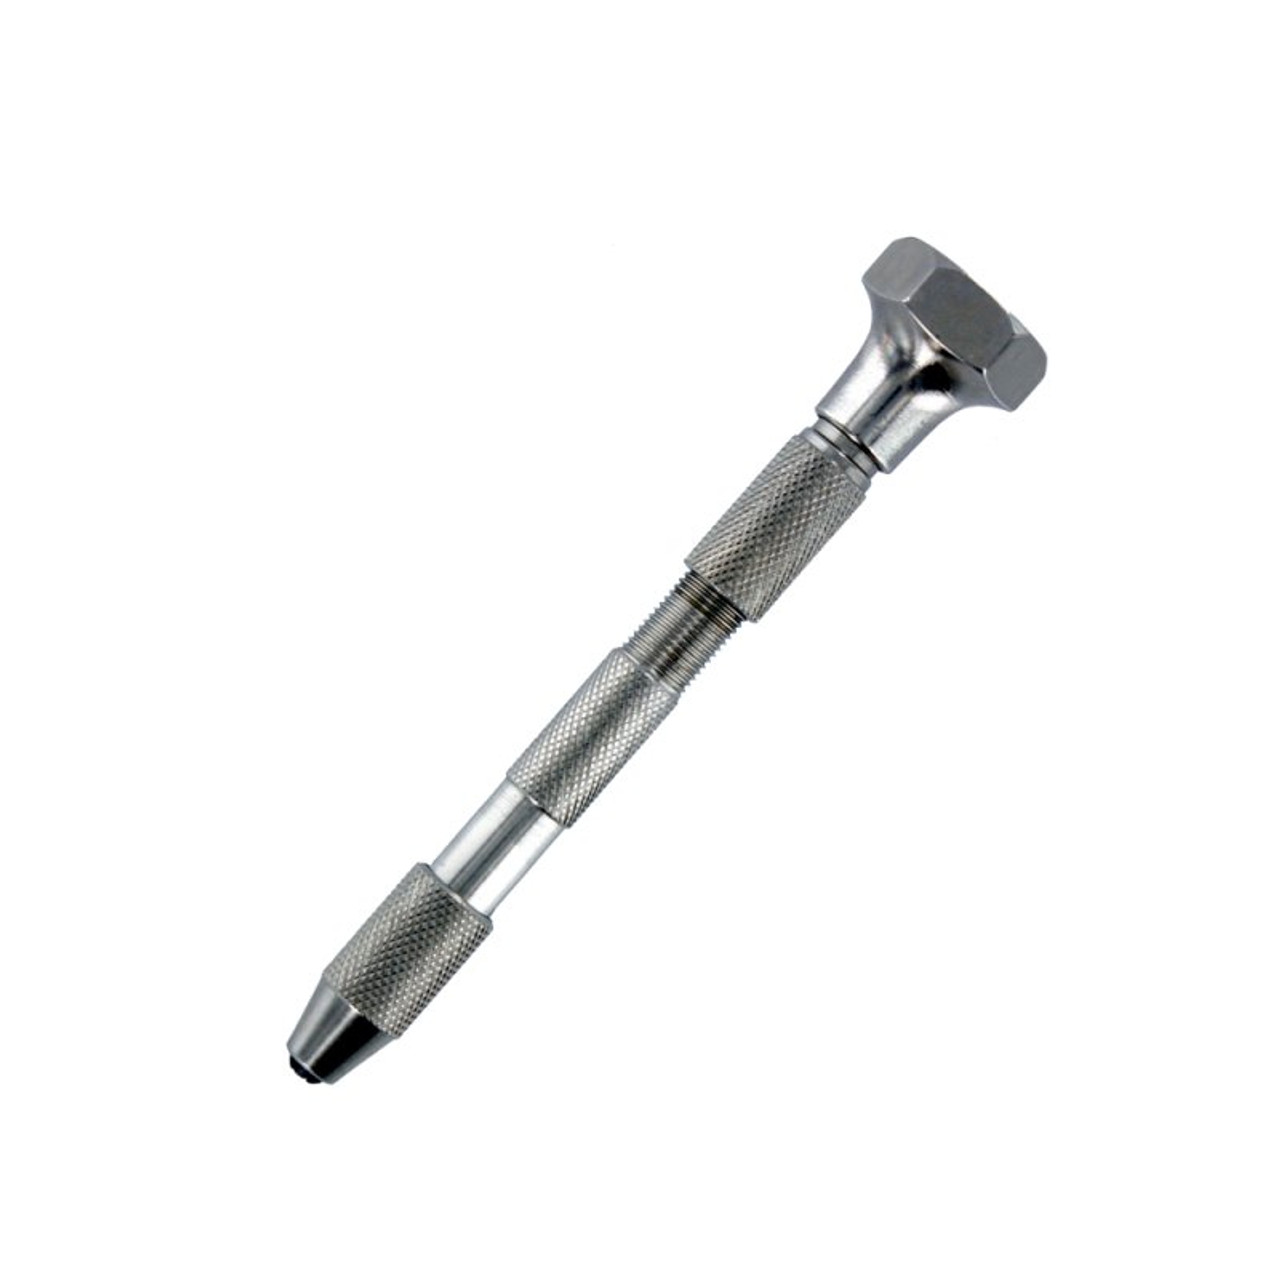 Double Ended Swivel Top Pin Vice